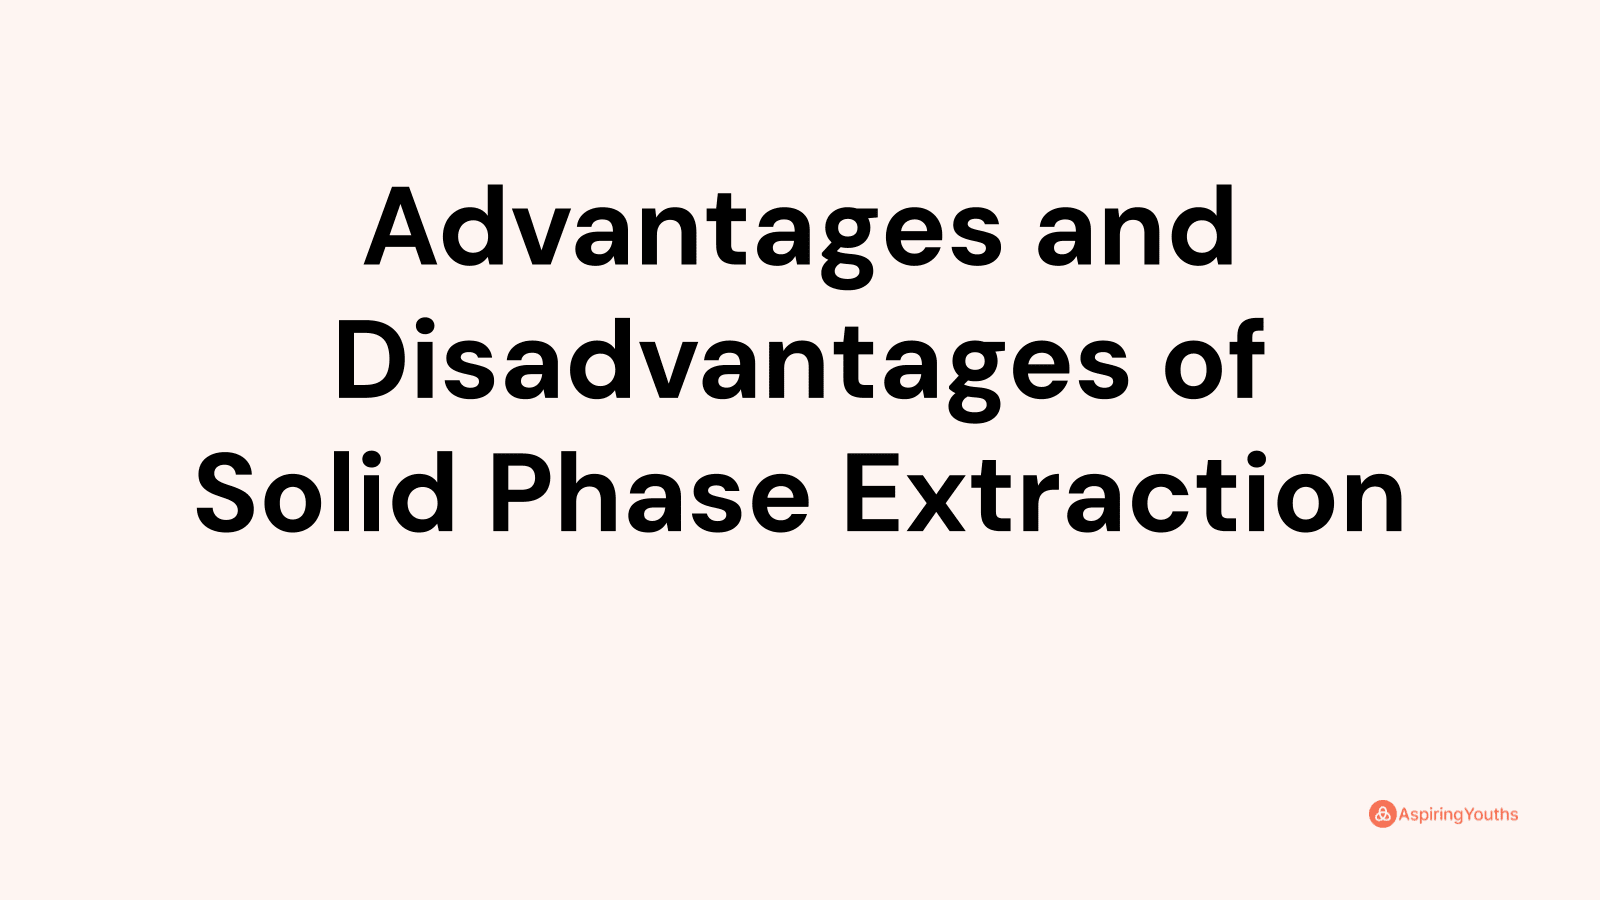 Advantages and disadvantages of Solid Phase Extraction